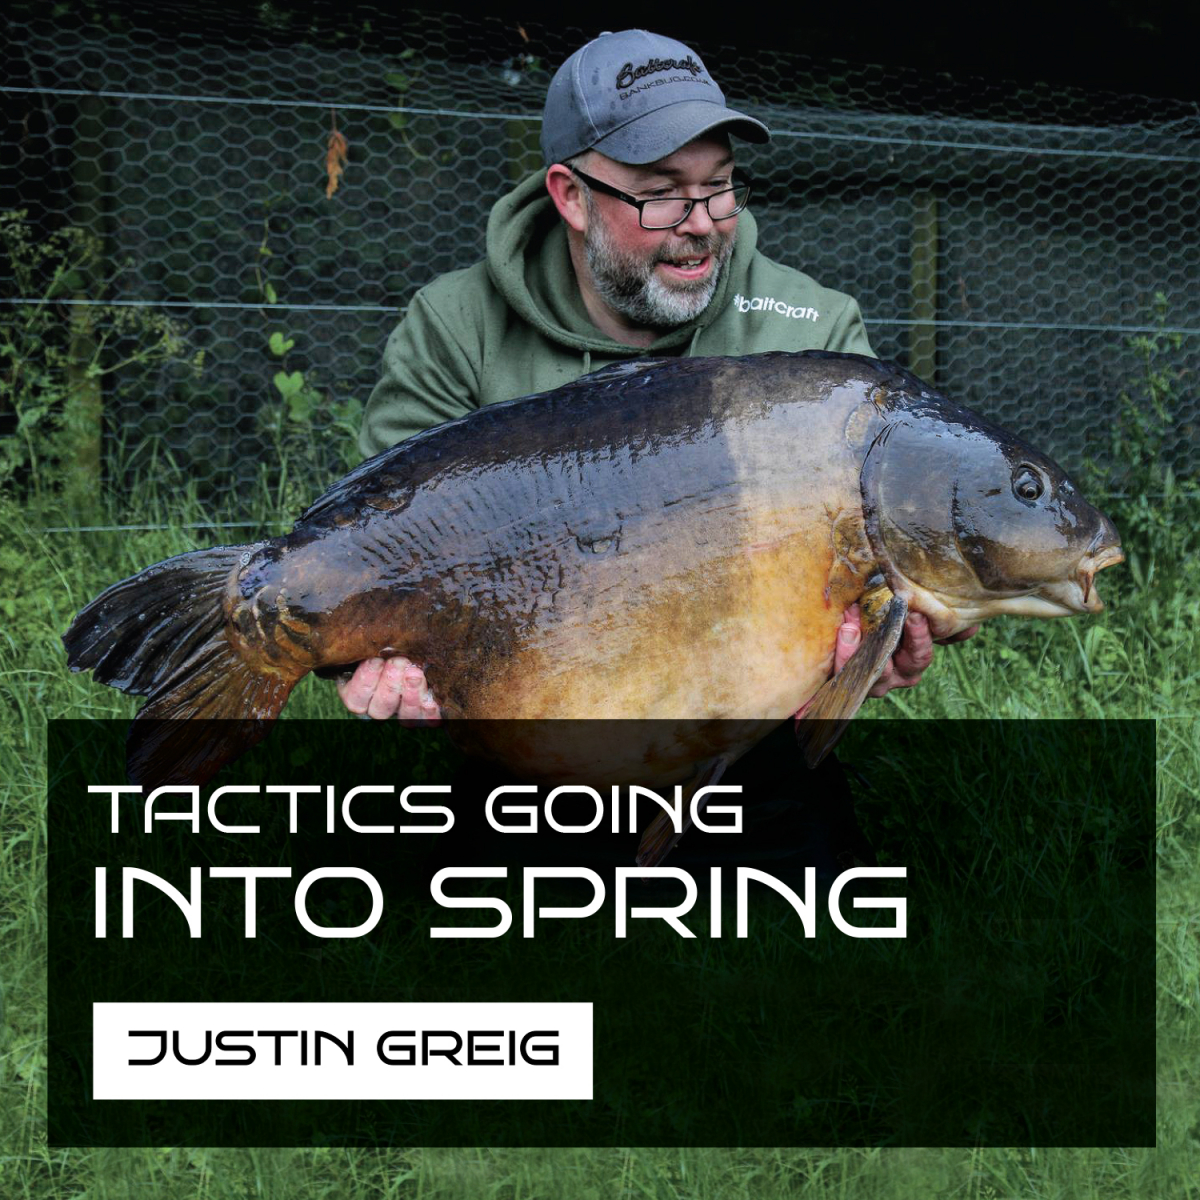 TACTICS GOING INTO SPRING